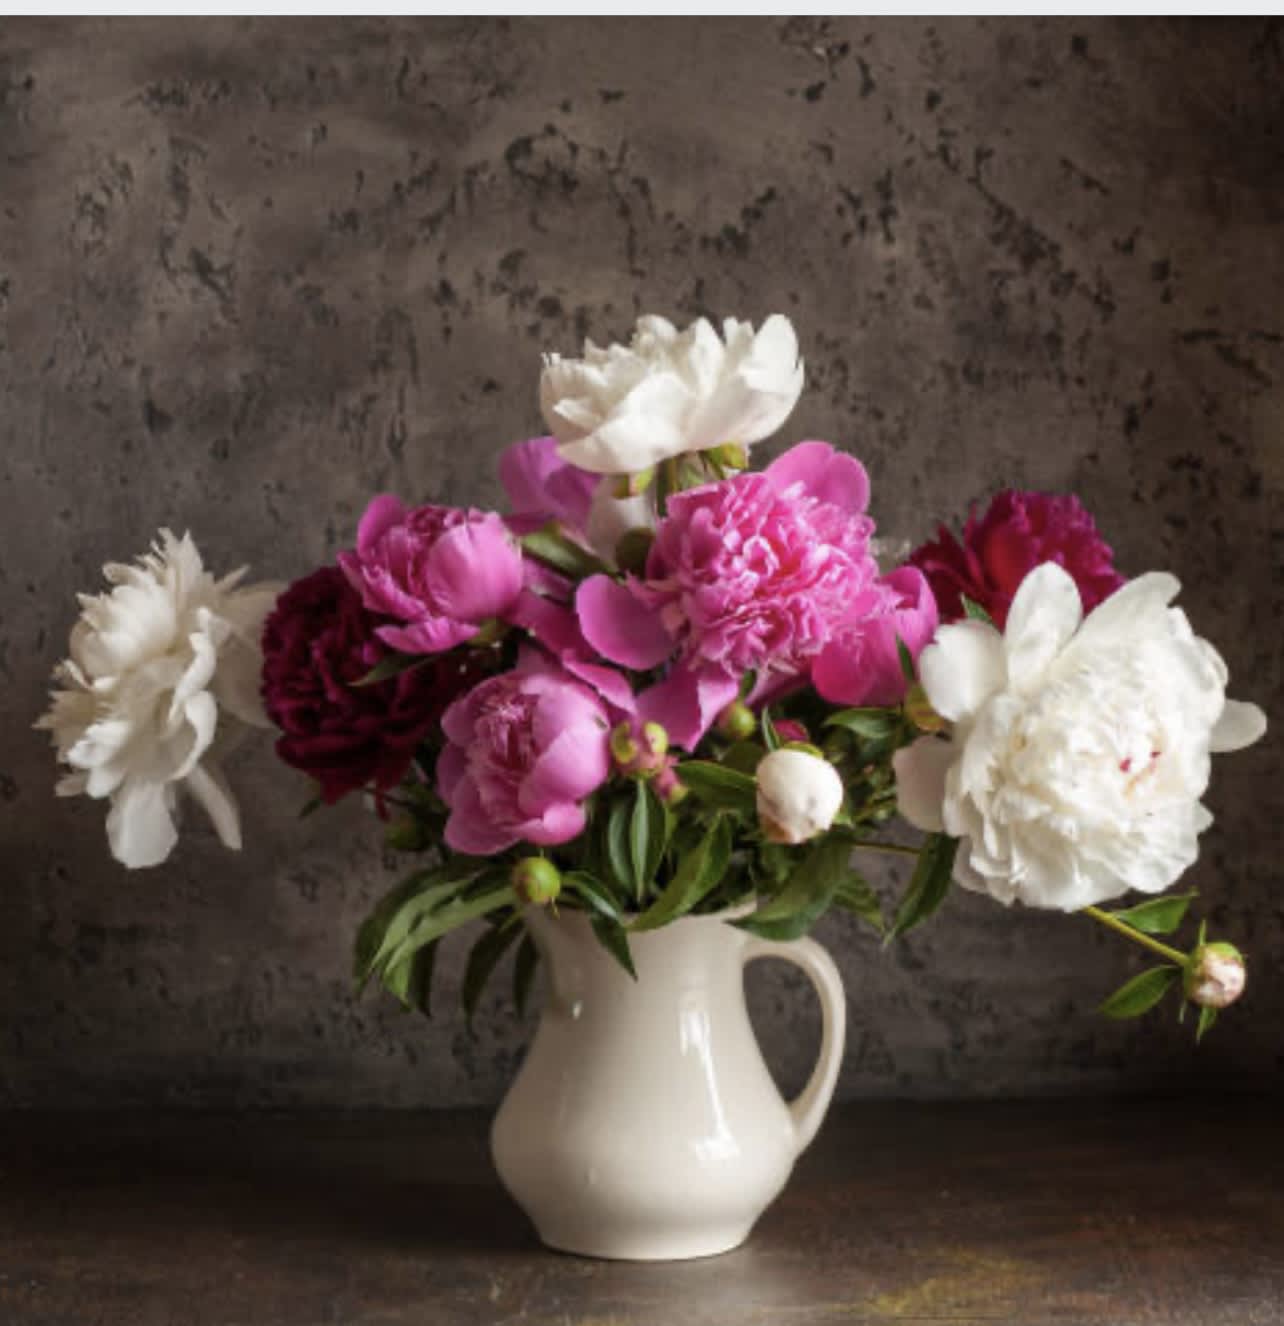 Pitcher of Peonies - White pitcher with red and white peonies, hot pink and light pink ranunculus. Greens may be needed to create fullness in vessel.